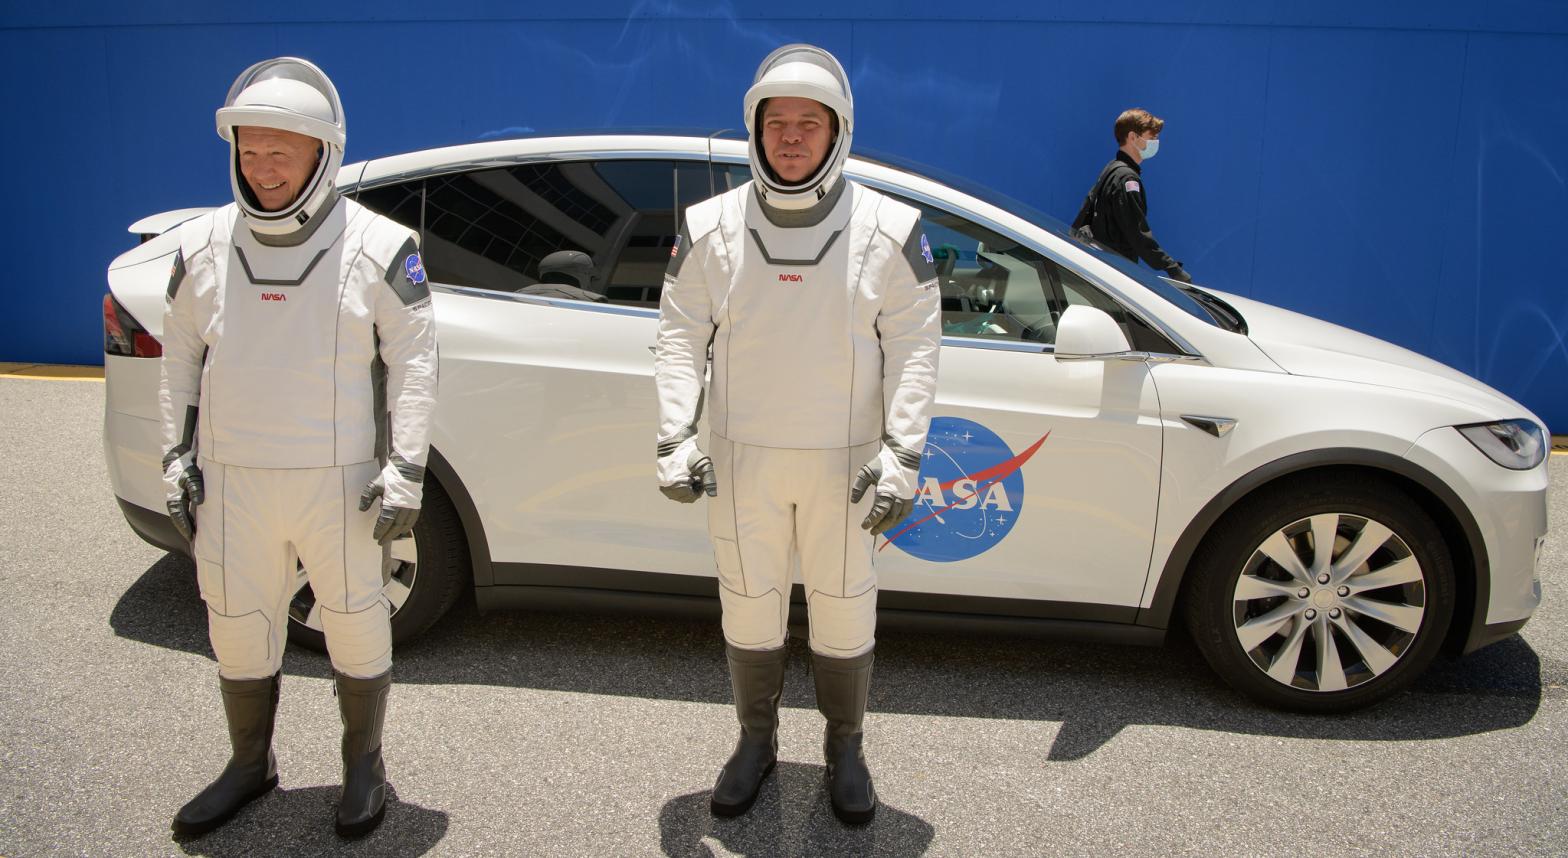 NASA astronauts Douglas Hurley and Robert Behnken wearing SpaceX spacesuits and with a Tesla Model X behind them.  (Image: NASA)